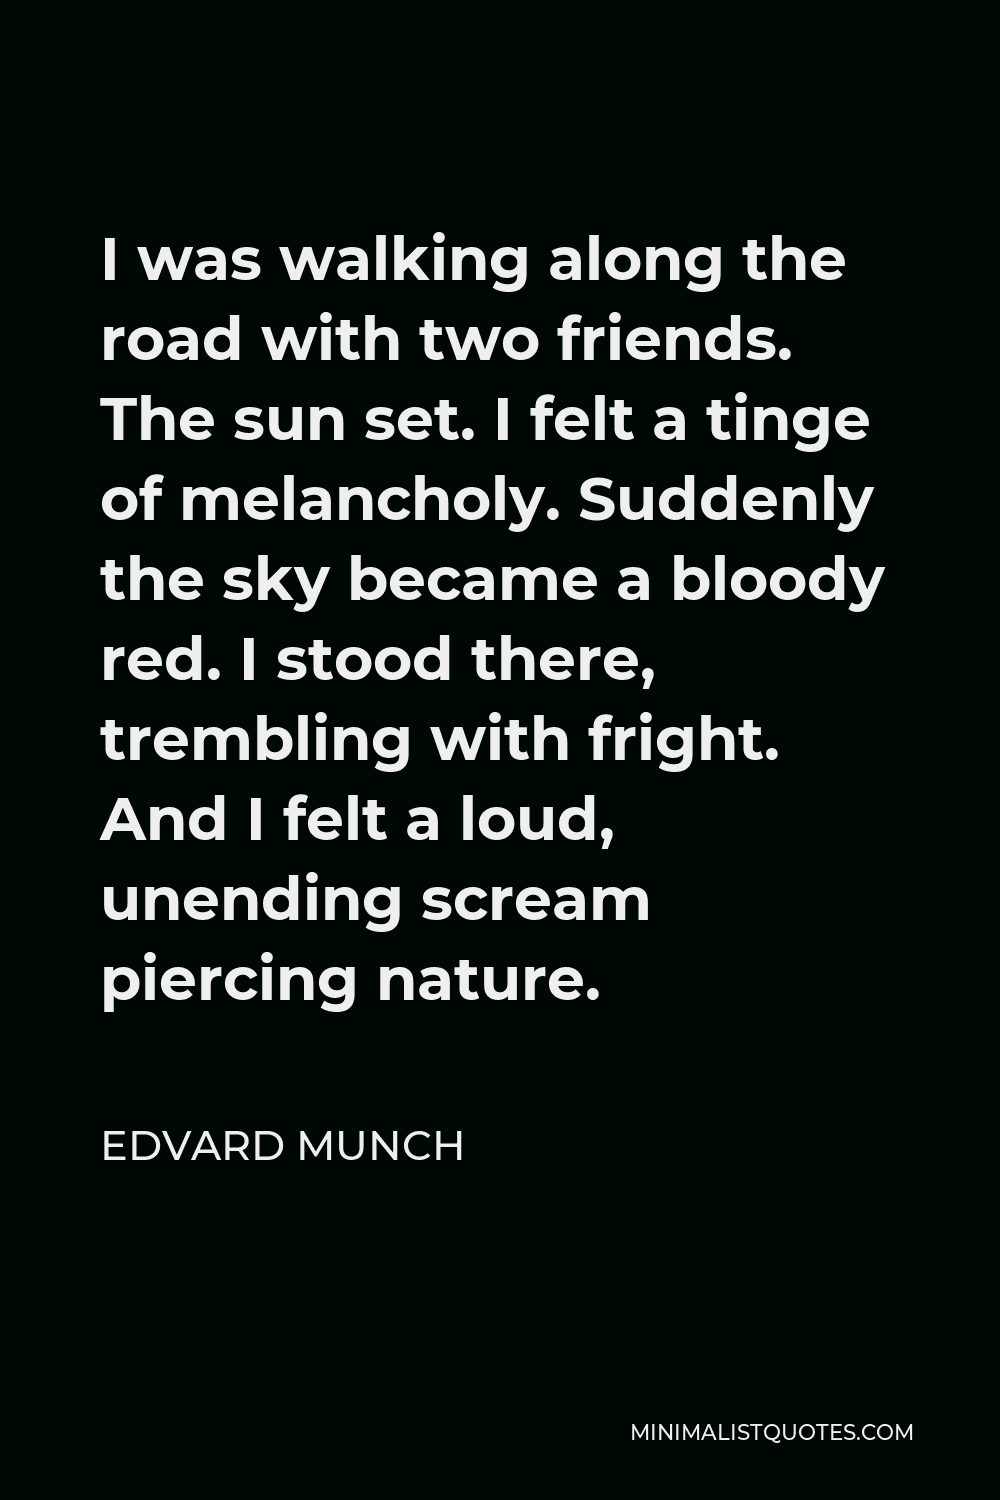 Edvard Munch Quote - I was walking along the road with two friends. The sun set. I felt a tinge of melancholy. Suddenly the sky became a bloody red. I stood there, trembling with fright. And I felt a loud, unending scream piercing nature.